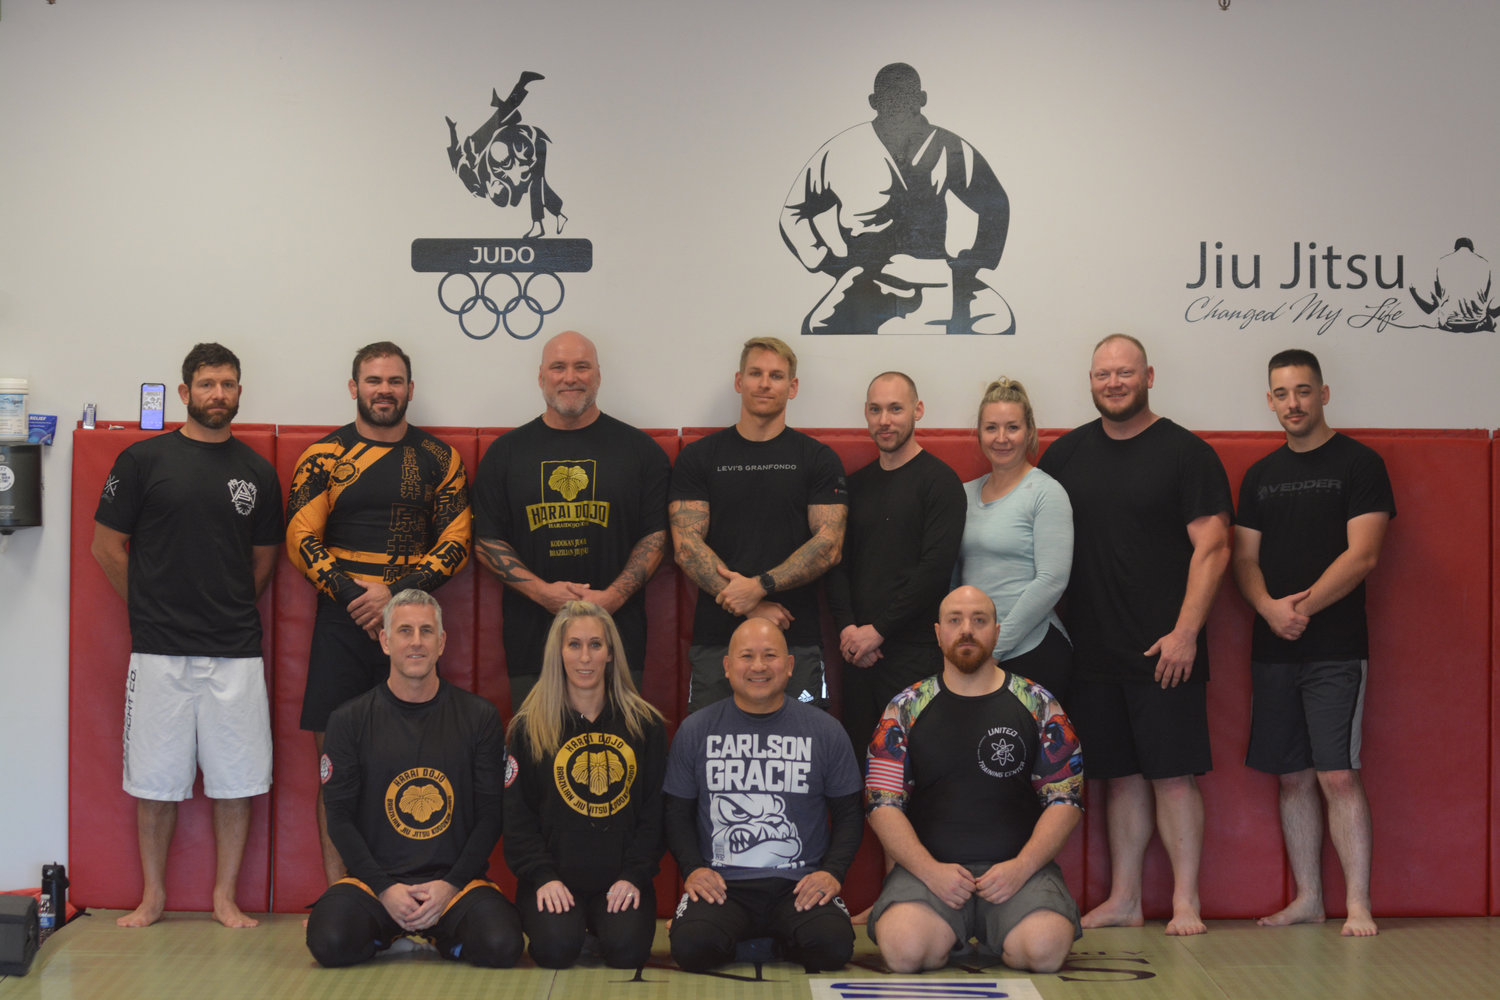 Members of the Yelm Police Department and Harai Dojo pose for a photo at the conclusion of their jiu-jitsu session.